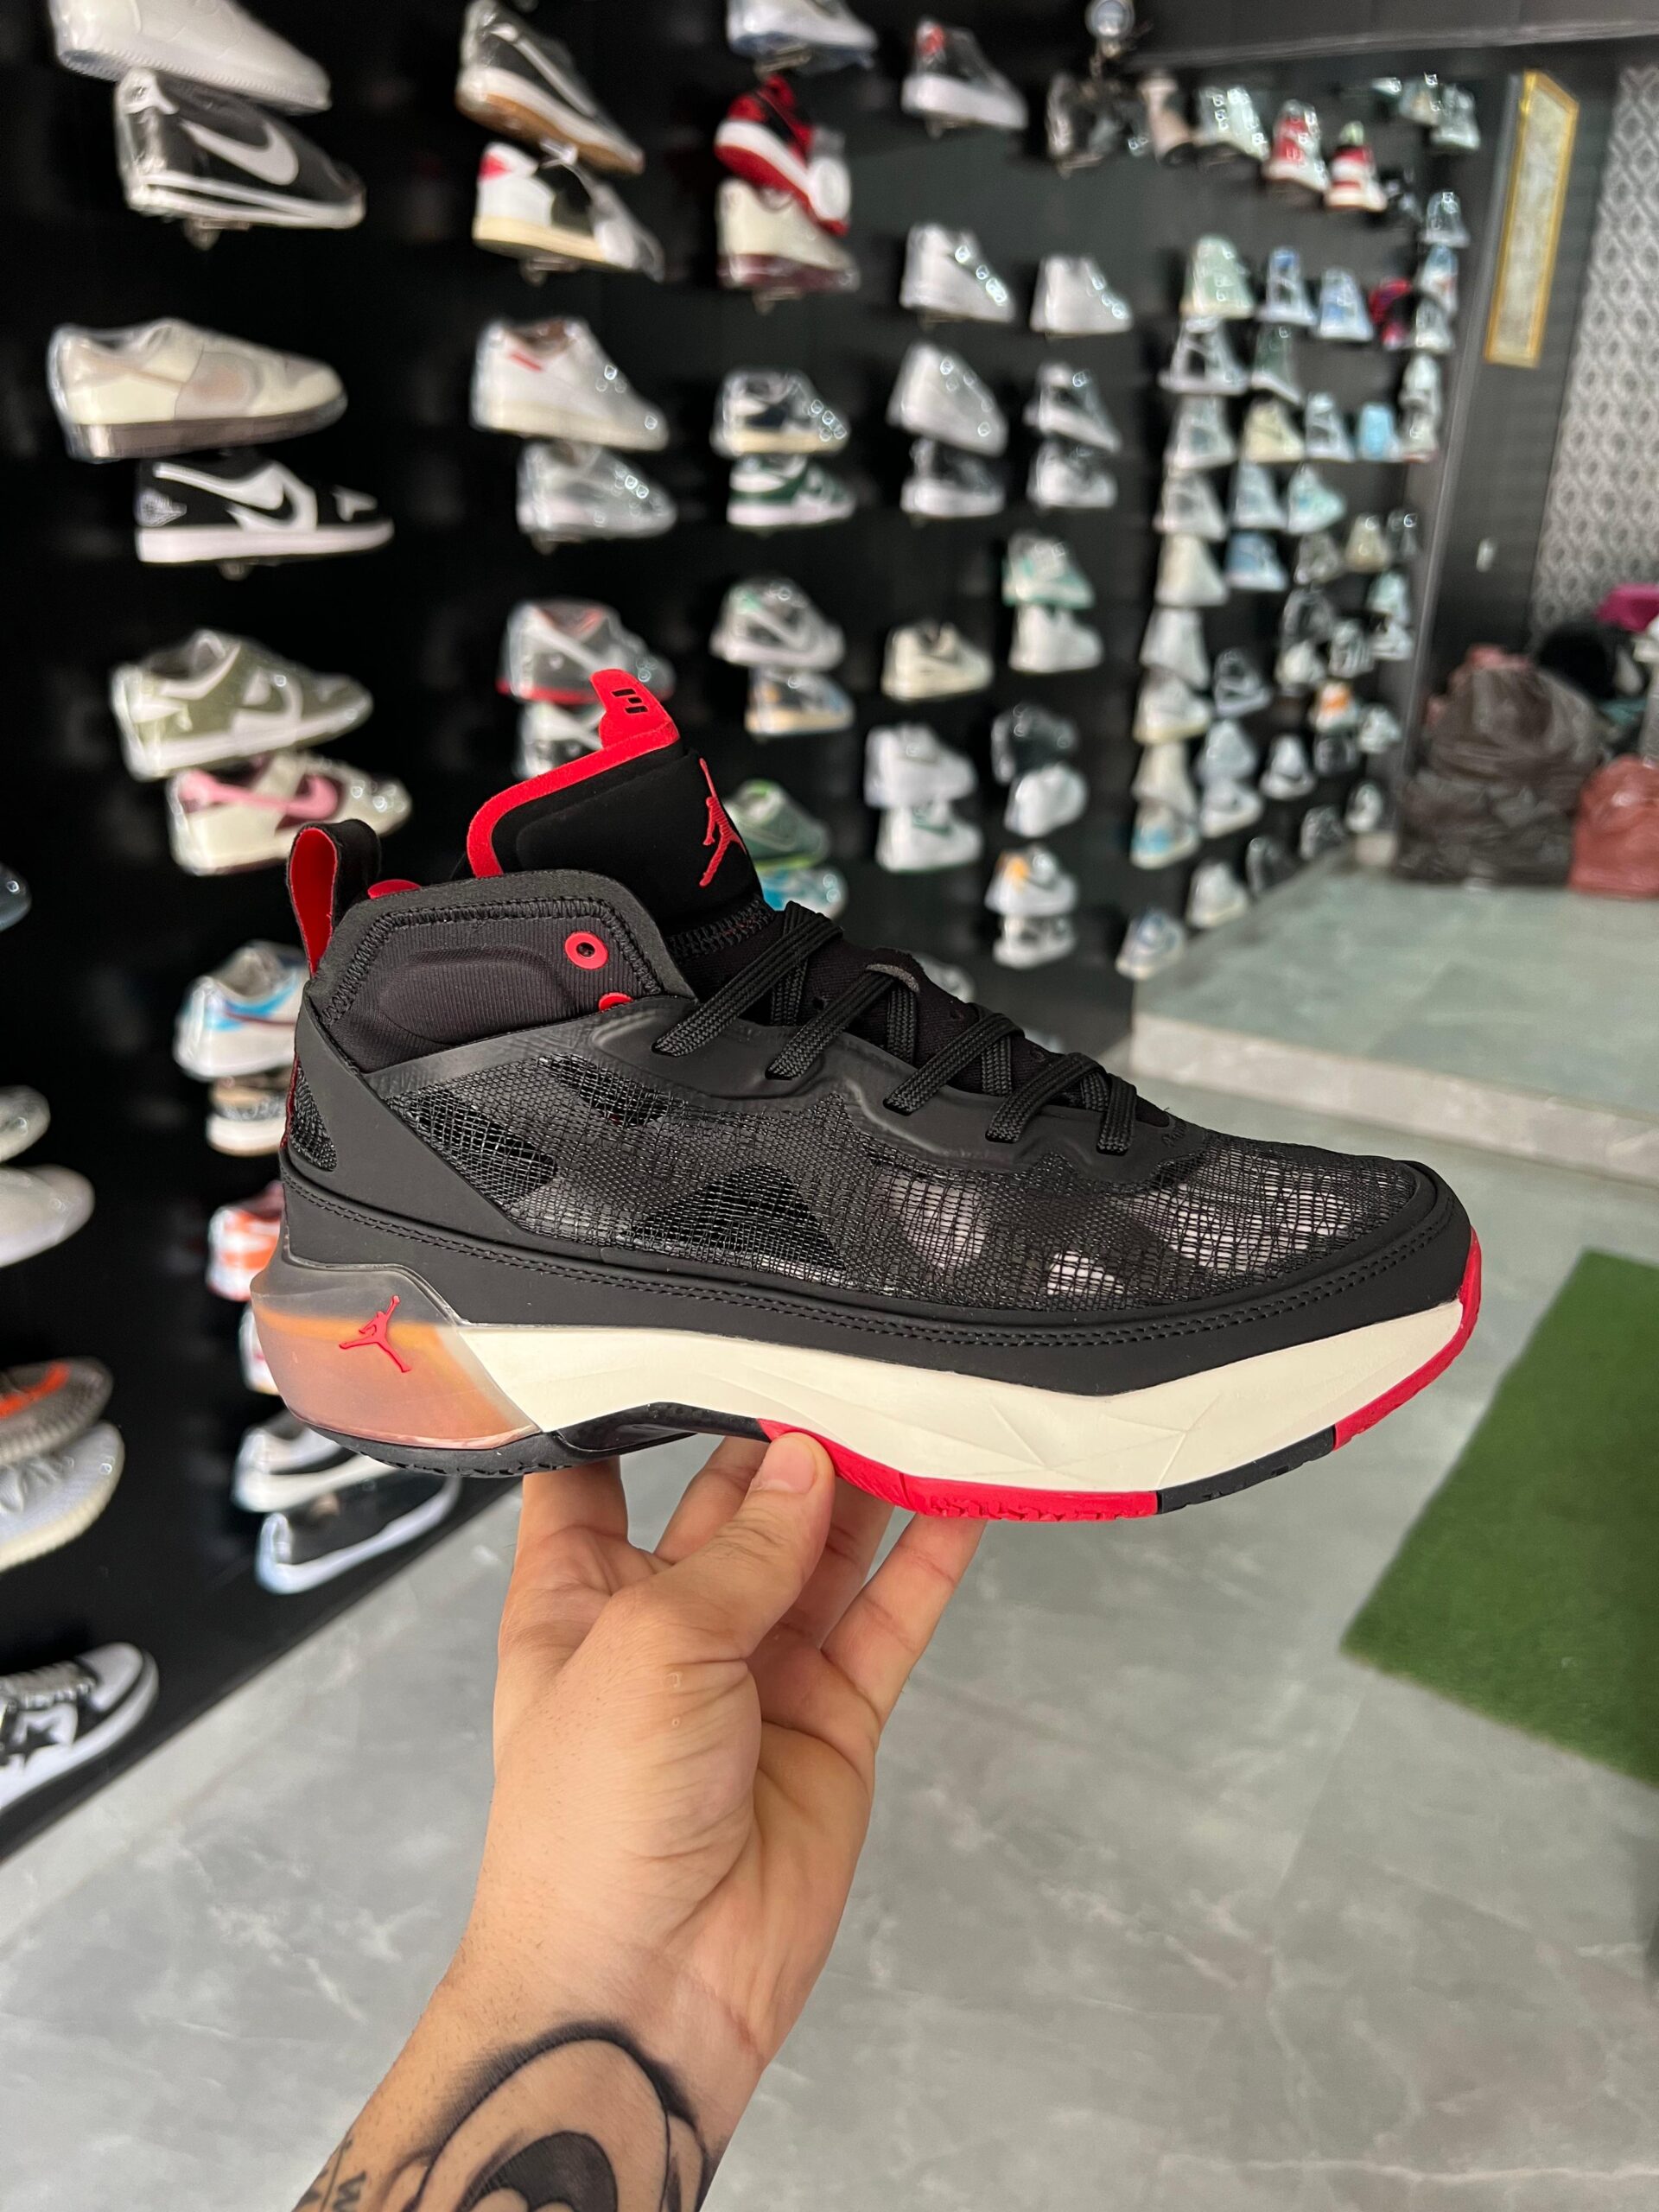 Retro 37 Sneakers For Boys 3 New Color